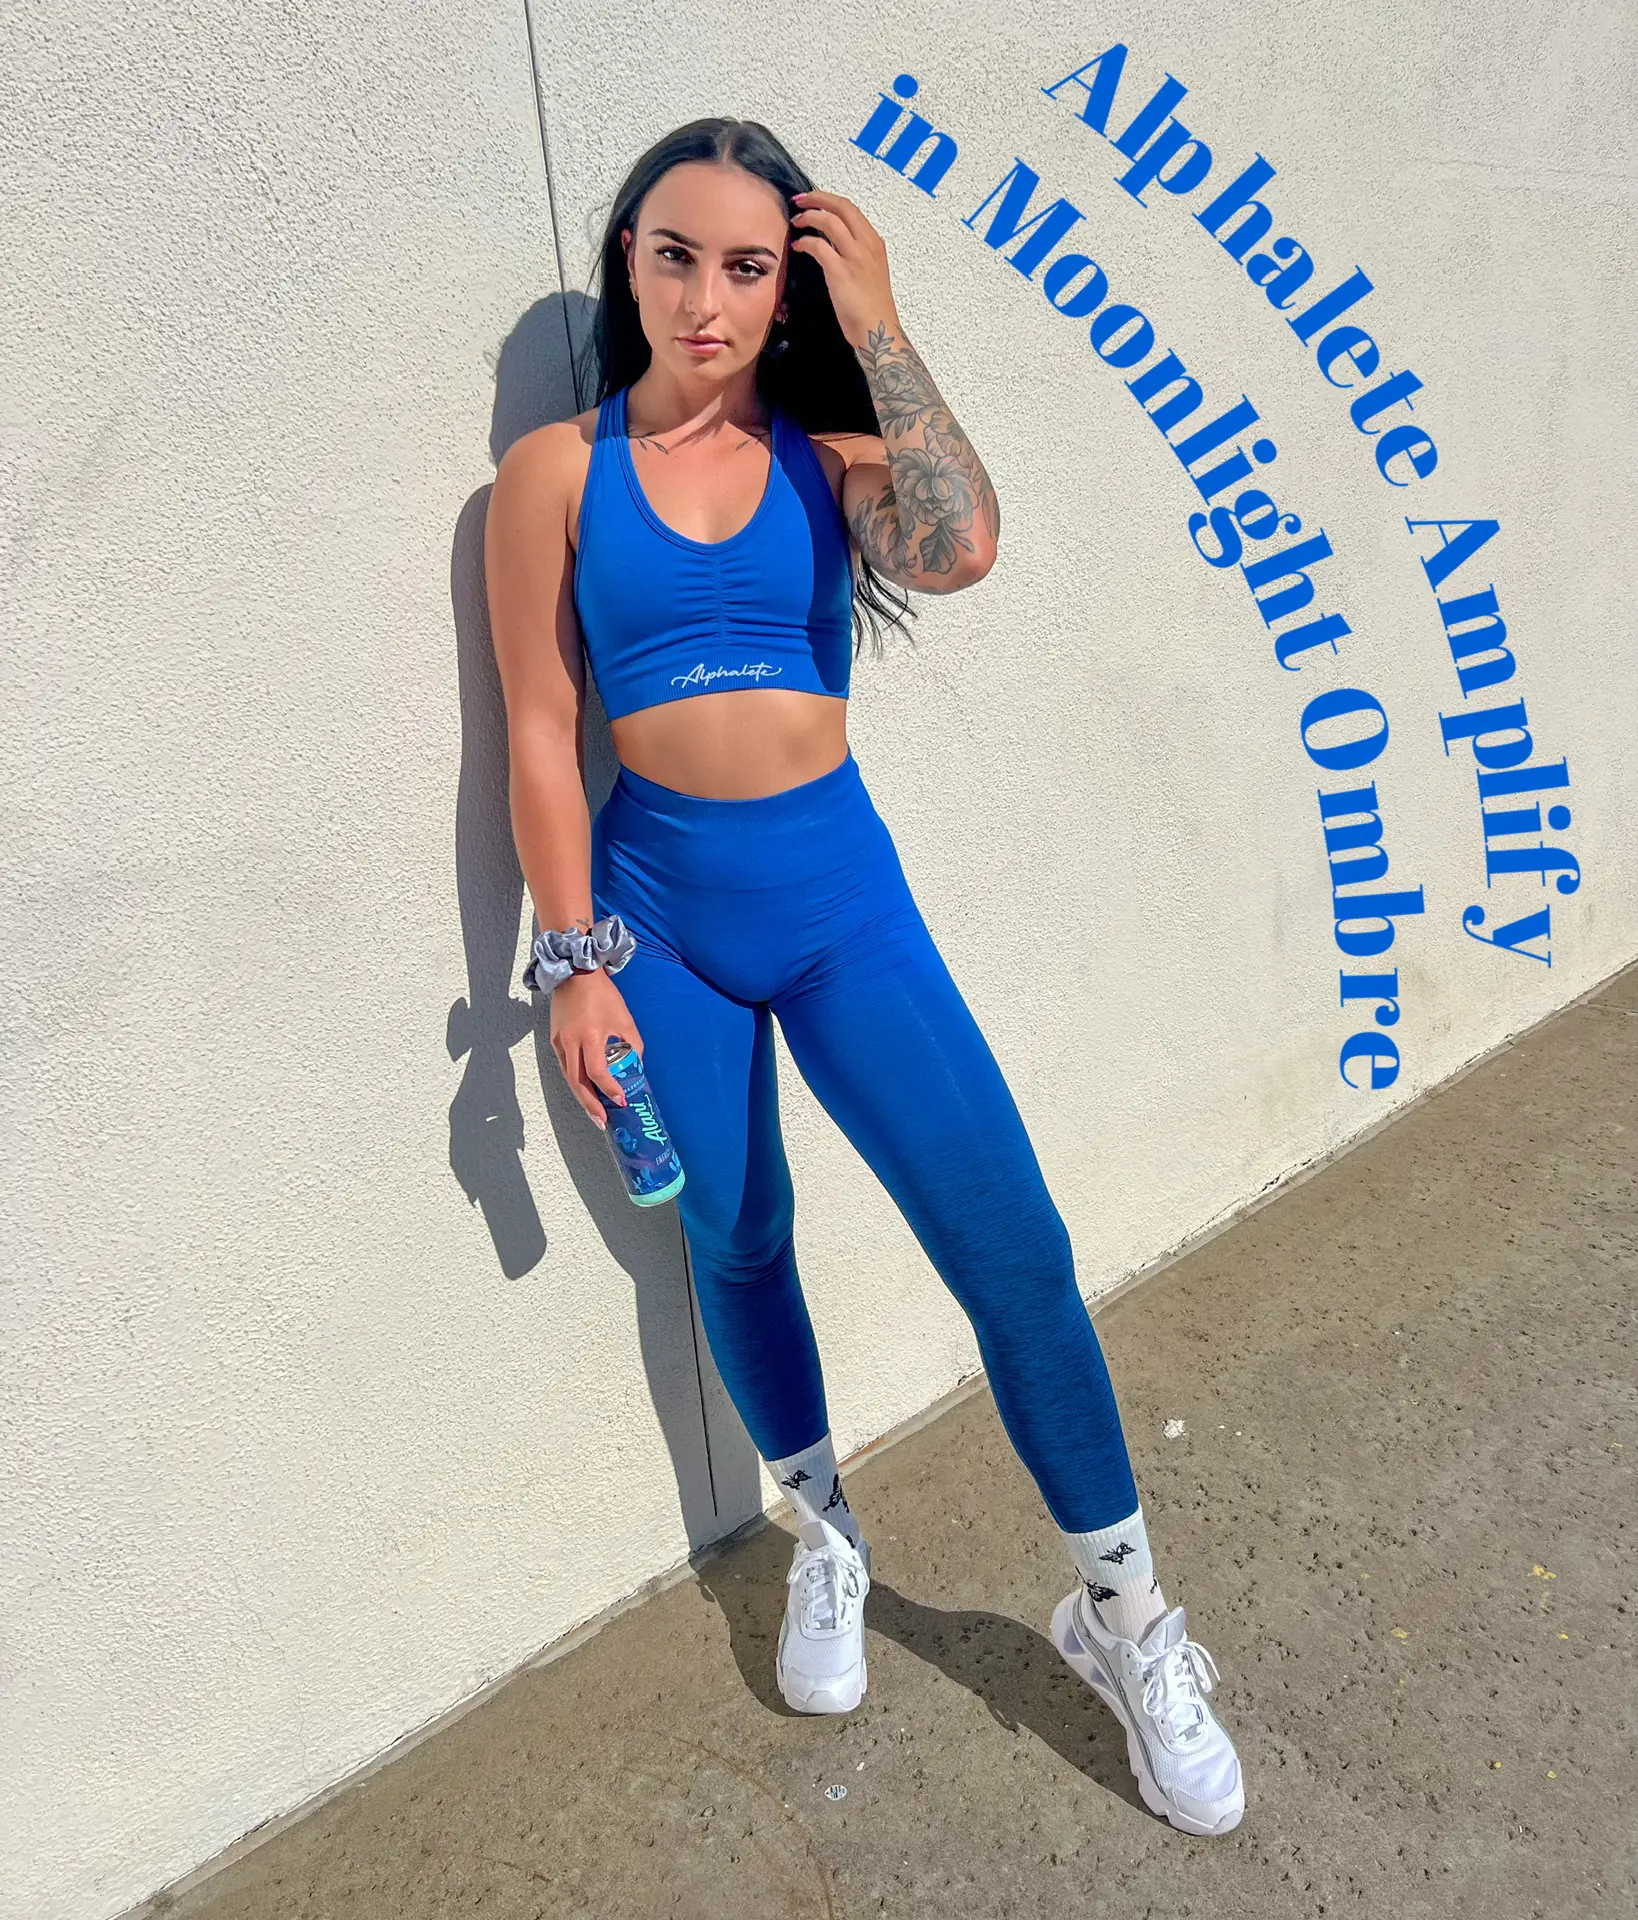 Gym outfit+nail inspo, Gallery posted by kylensuttner